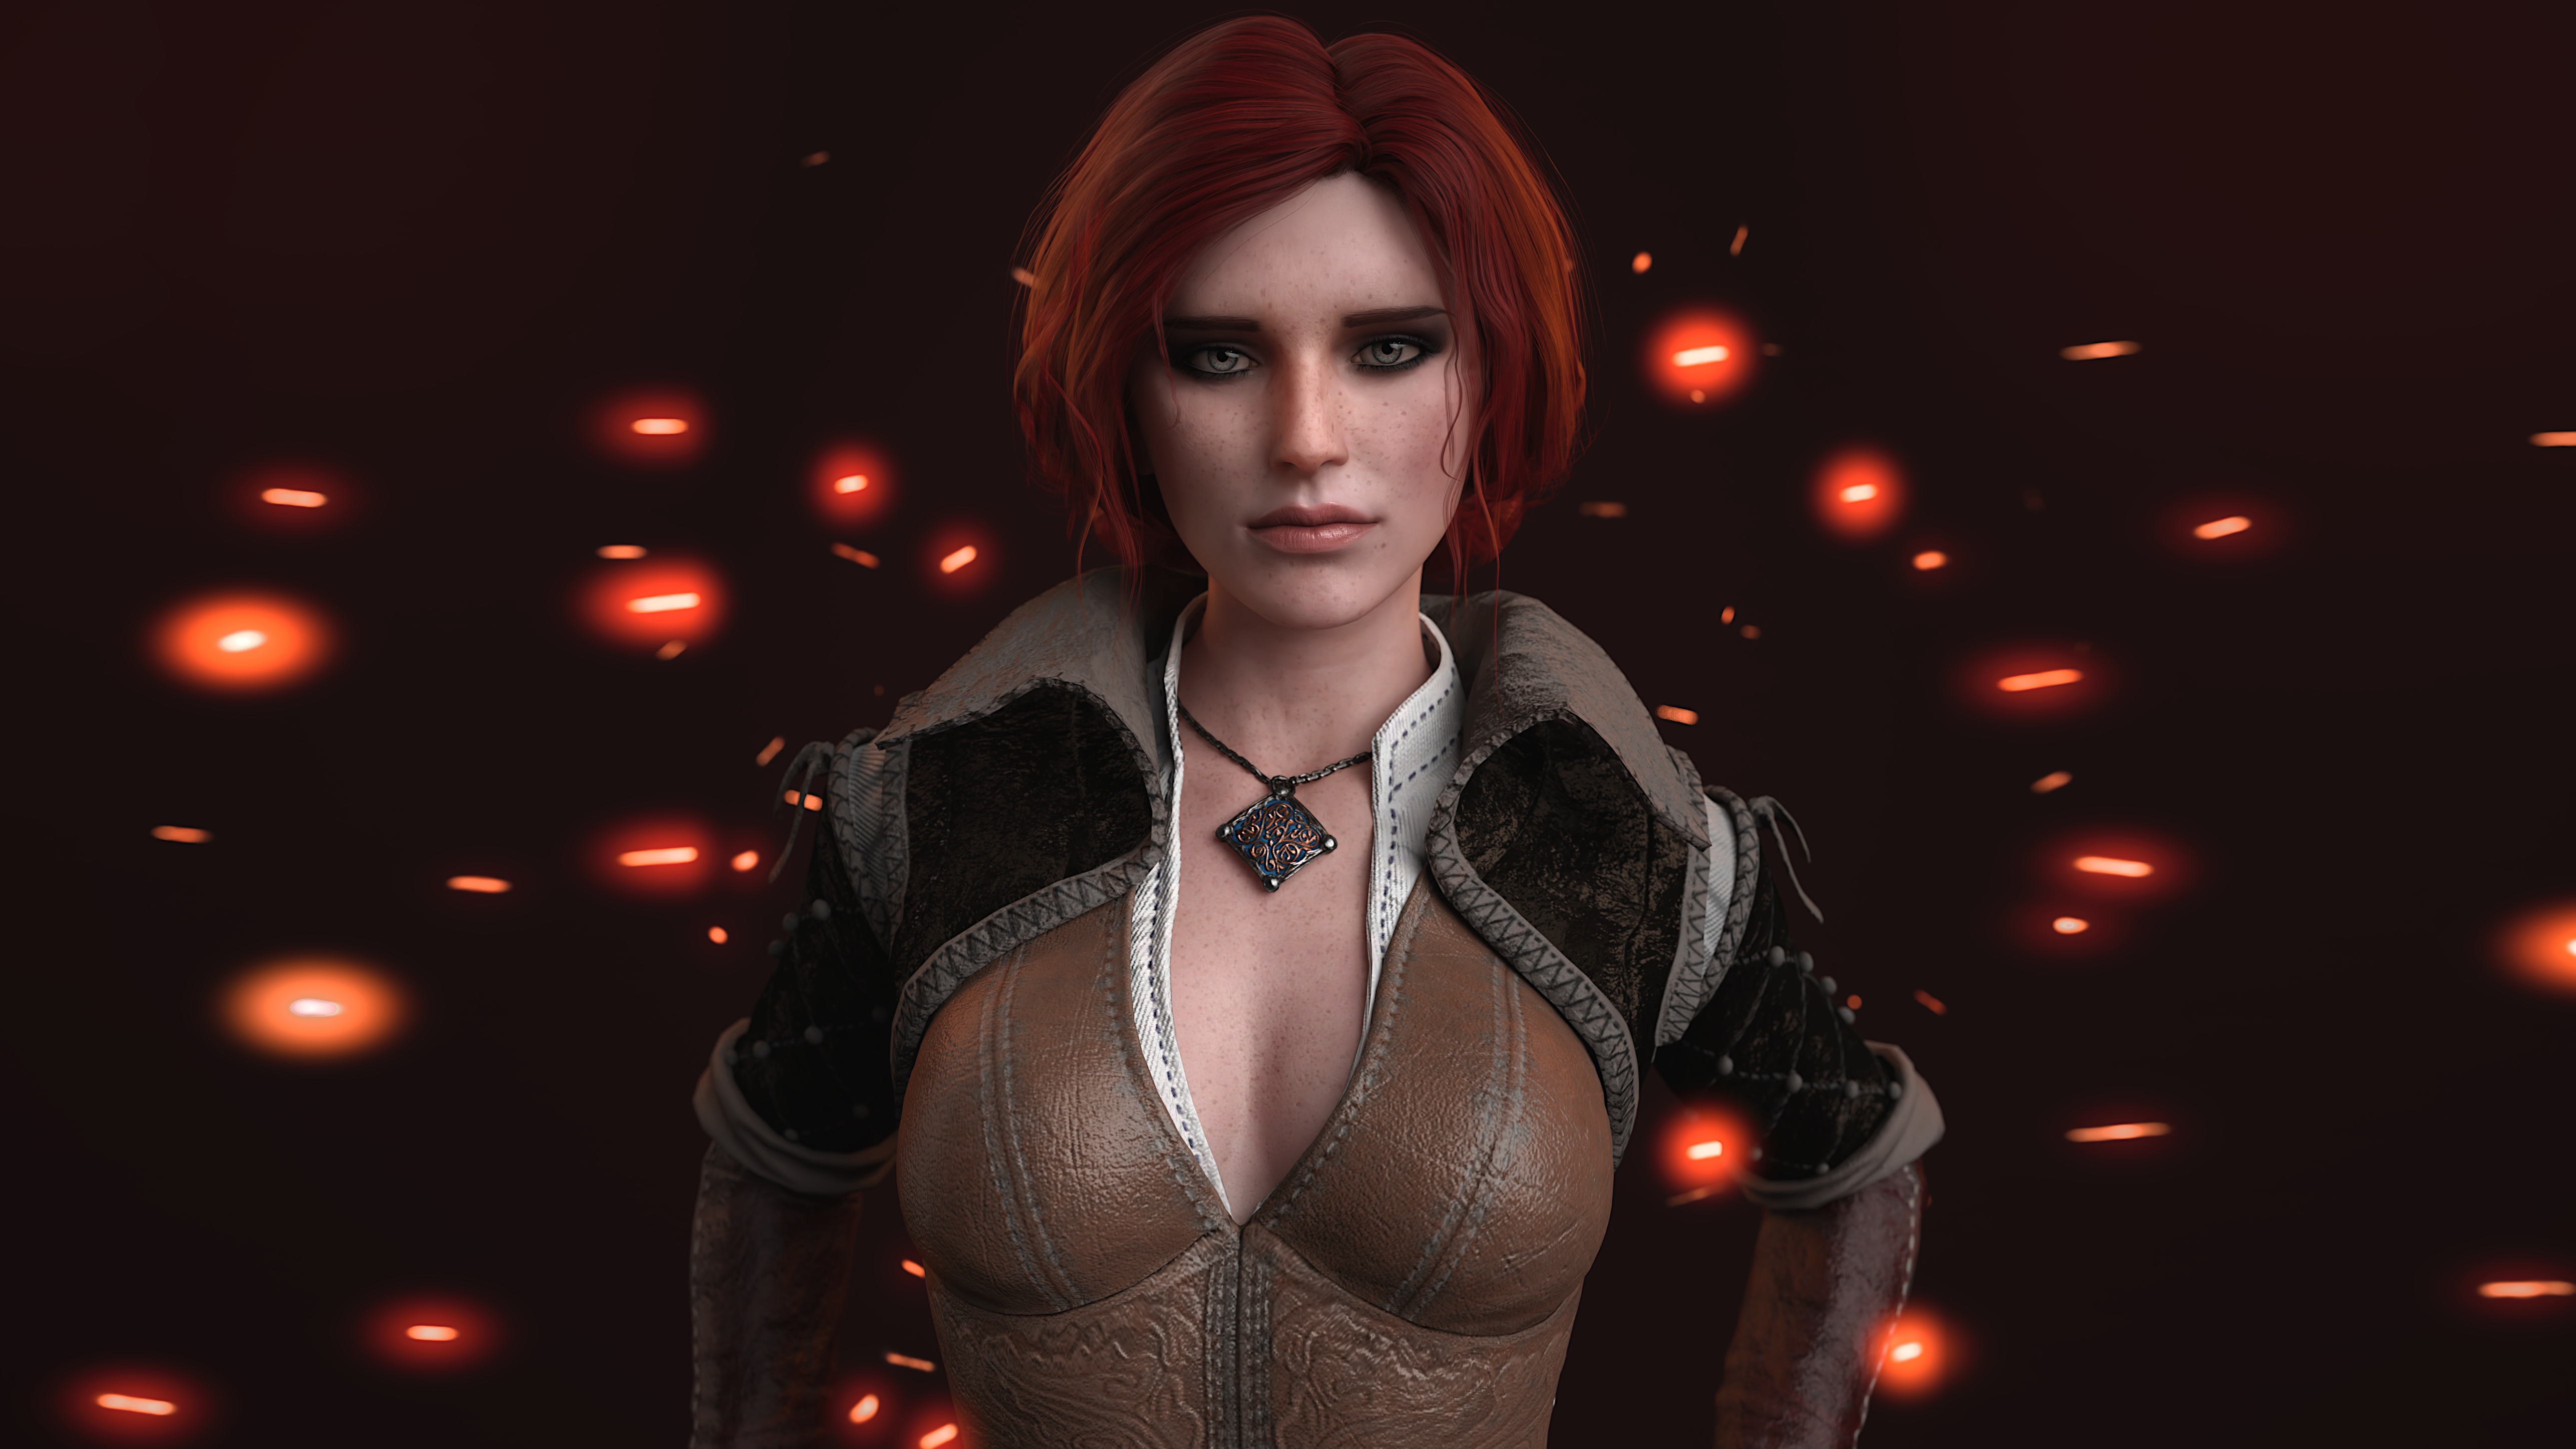 The Witcher The Witcher 3 AlienAlly Video Games Video Game Girls Video Game Characters Women Fantasy 5150x2897